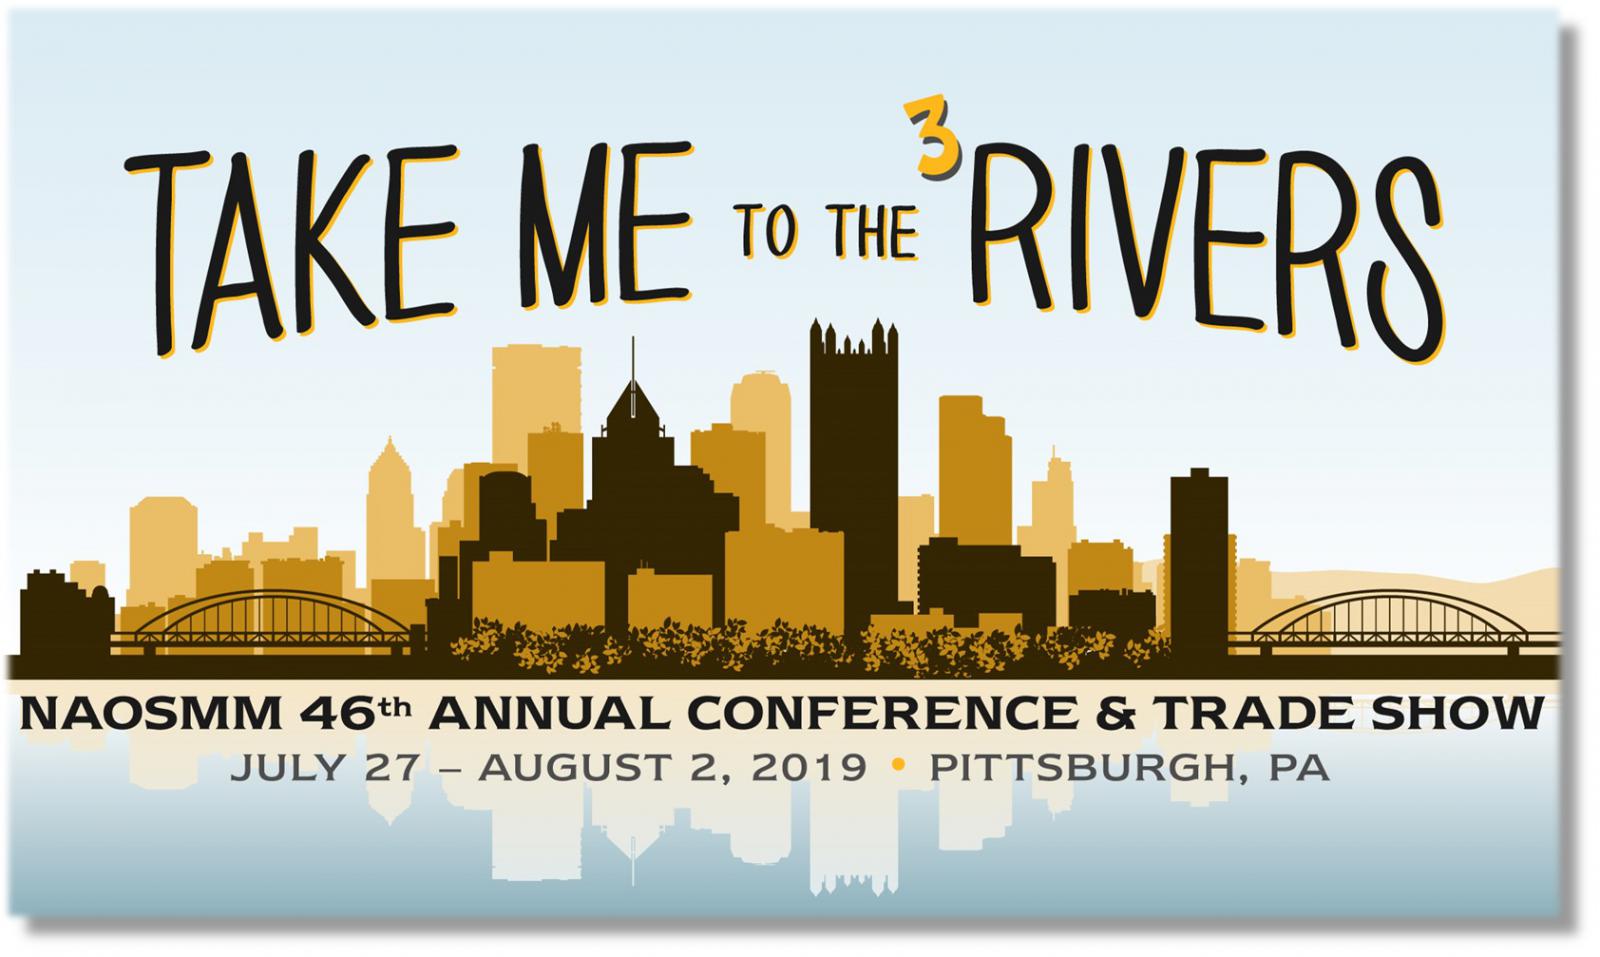 We’ll see you in Pittsburgh for NAOSMM 46th Annual Conference and Trade Show!